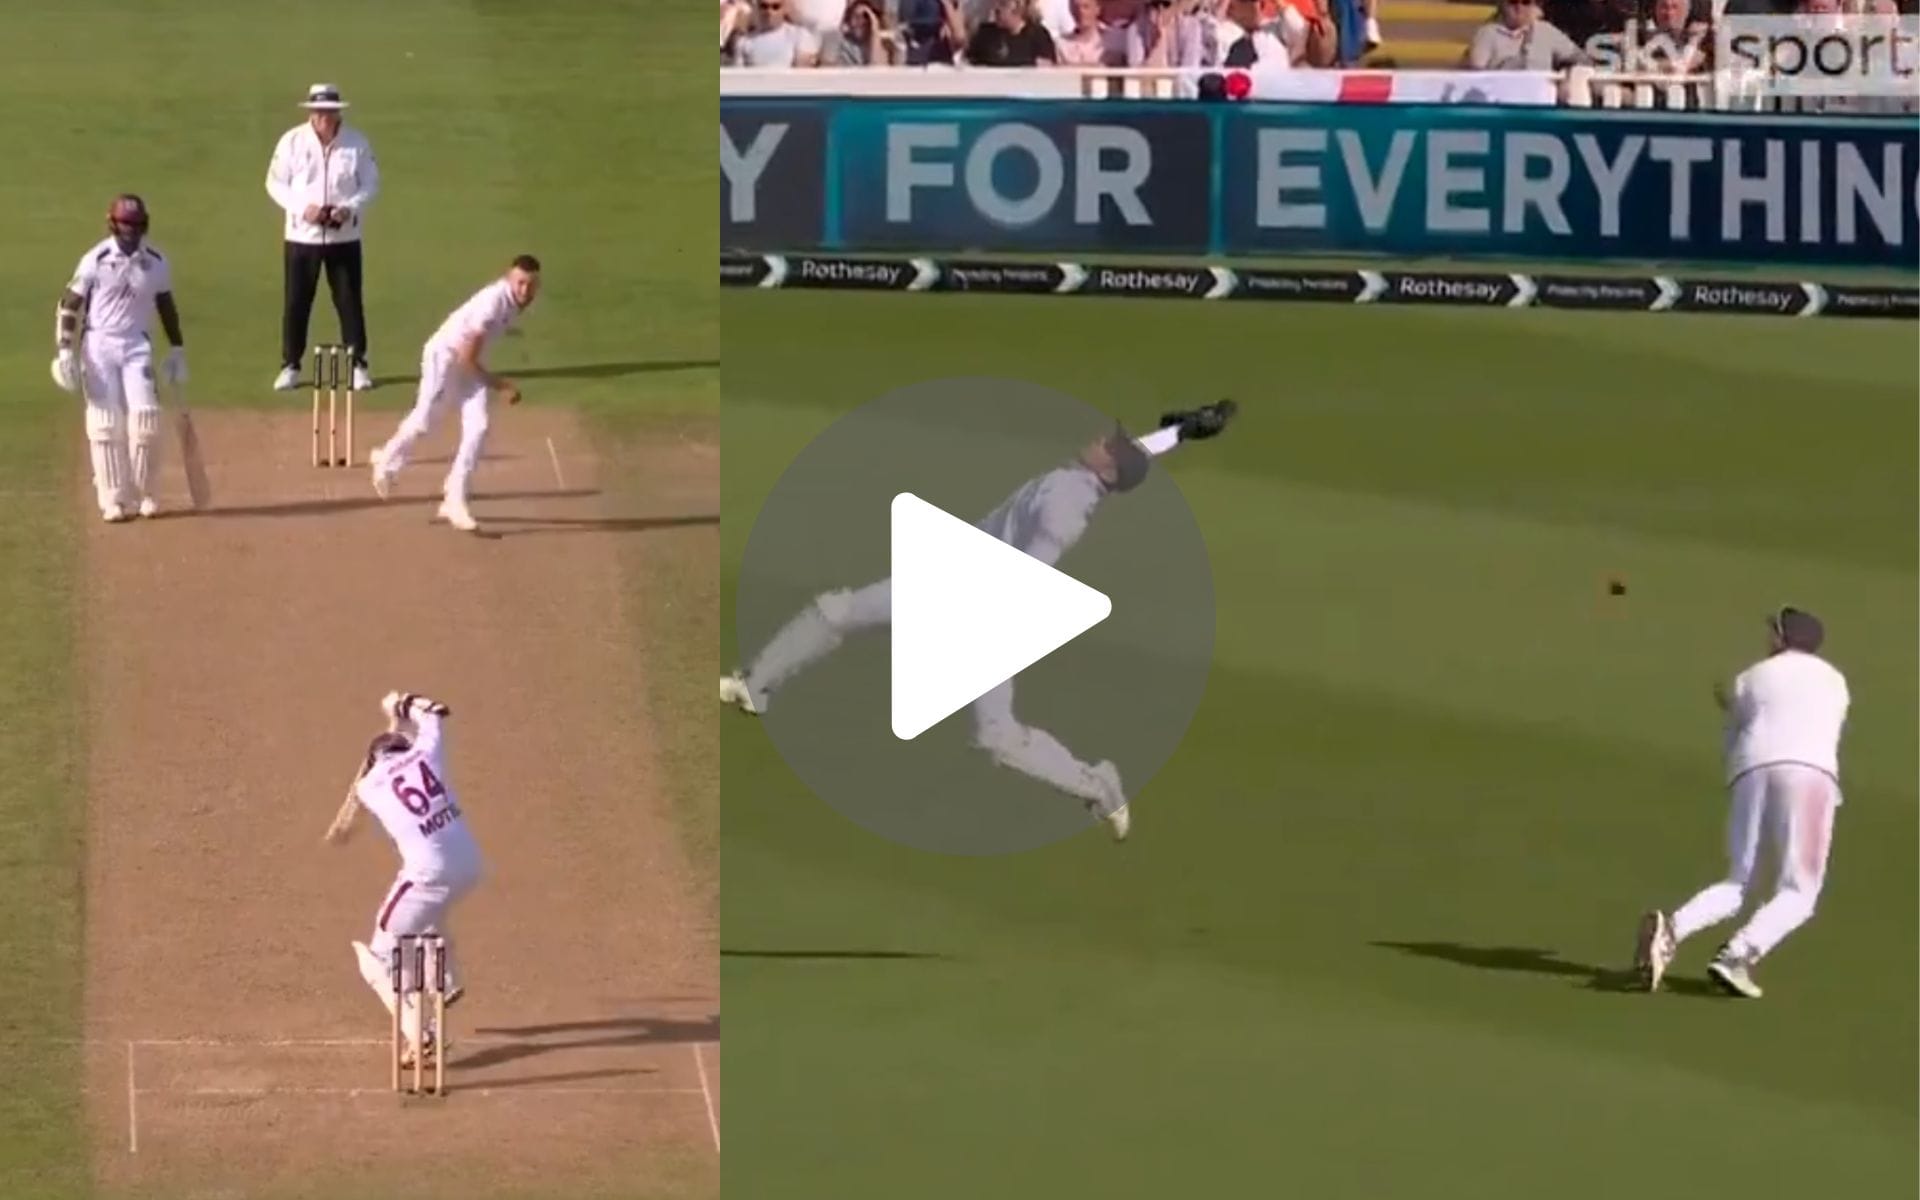 [Watch] Joe Root Takes An All-Time Great Catch As Atkinson Aims For Motie's Head